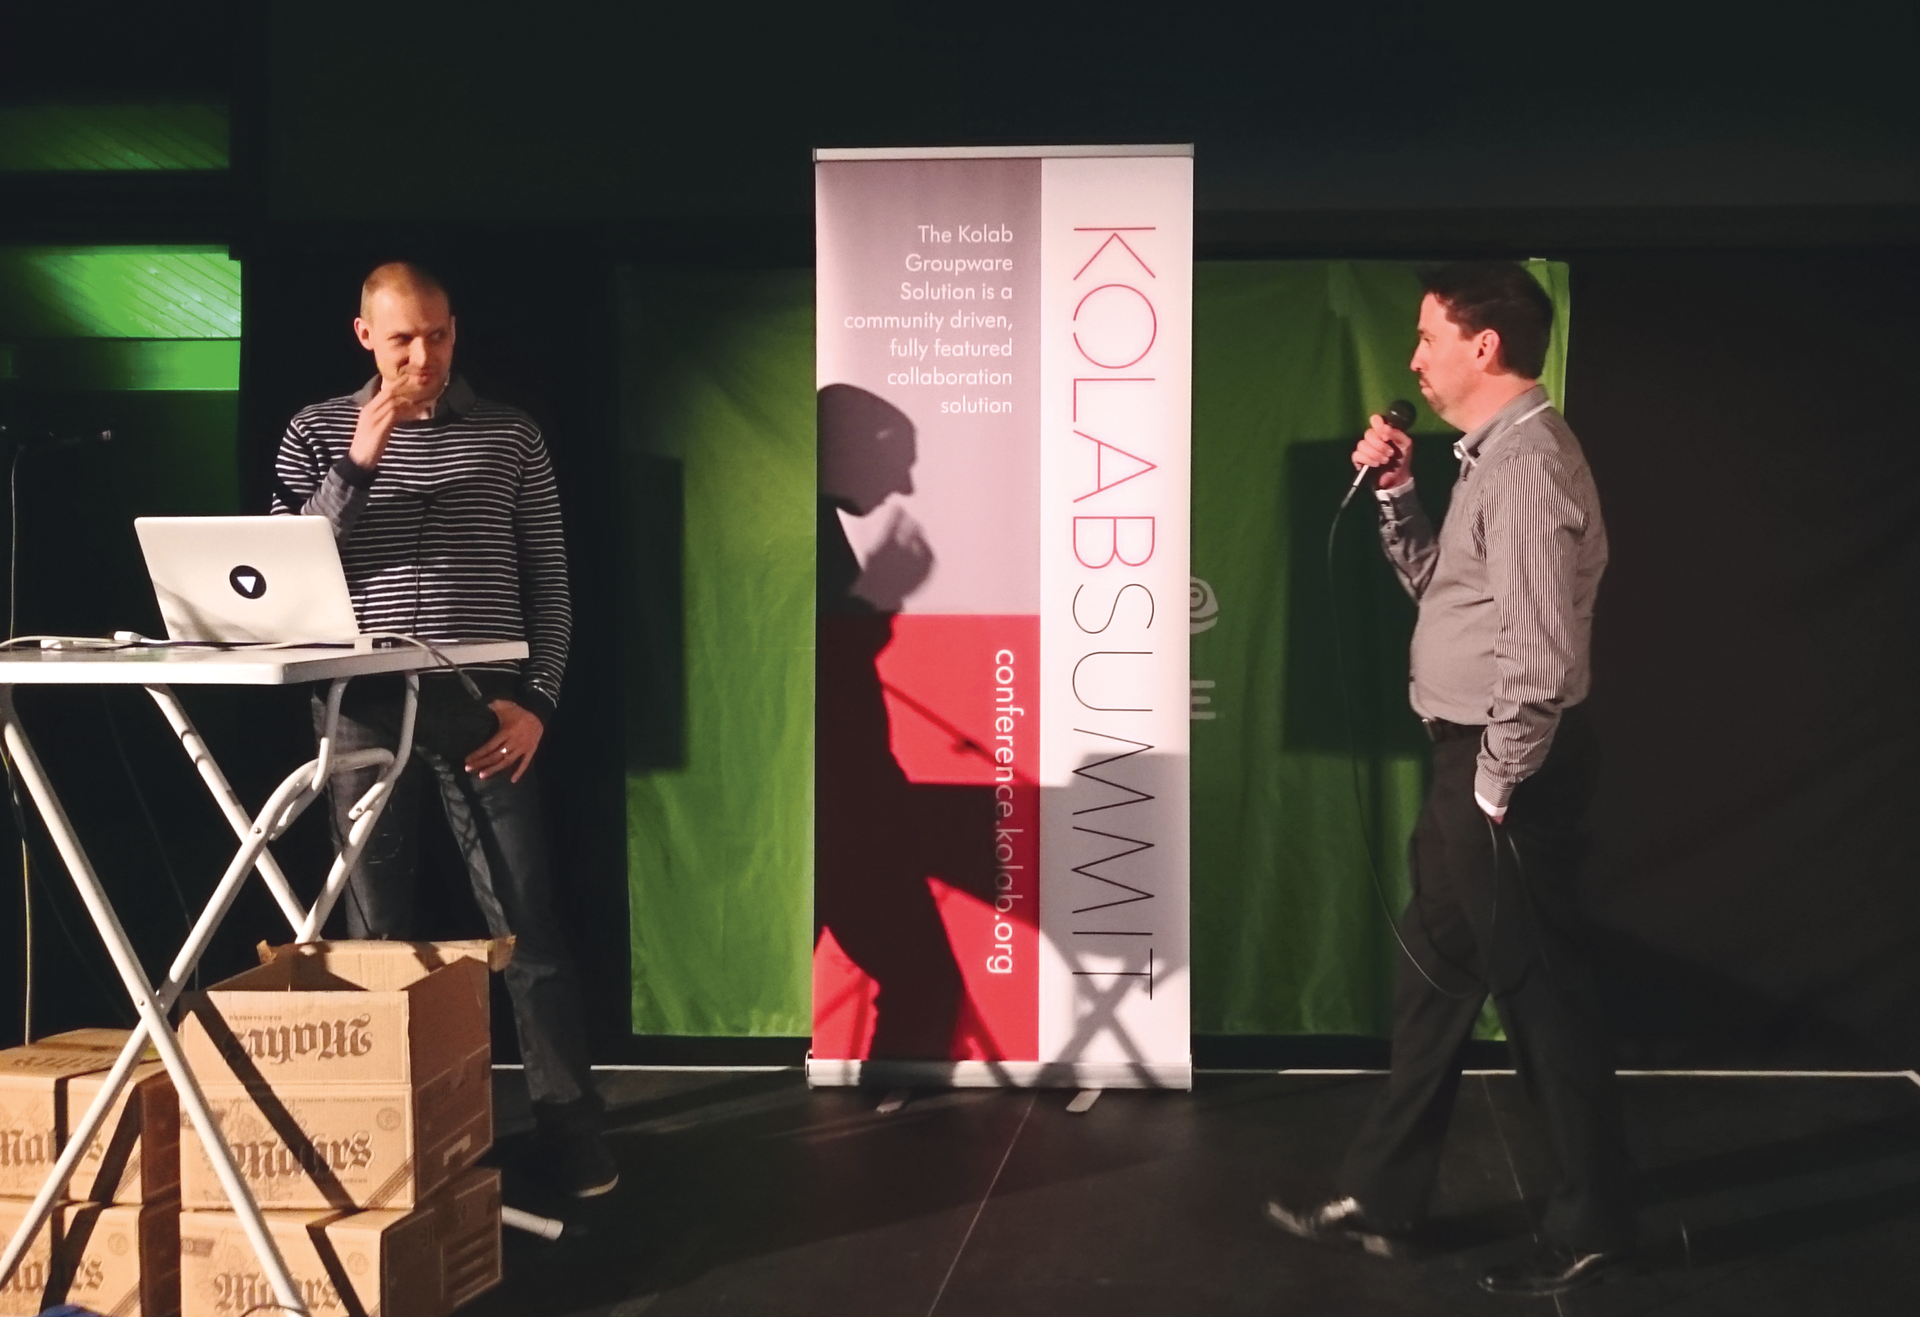 At the Kolab Summit 2015 in the Hague, Georg Greve, Thomas Brüderli, and Aaron Seigo announced a crowd-funding campaign for the webmail program. 